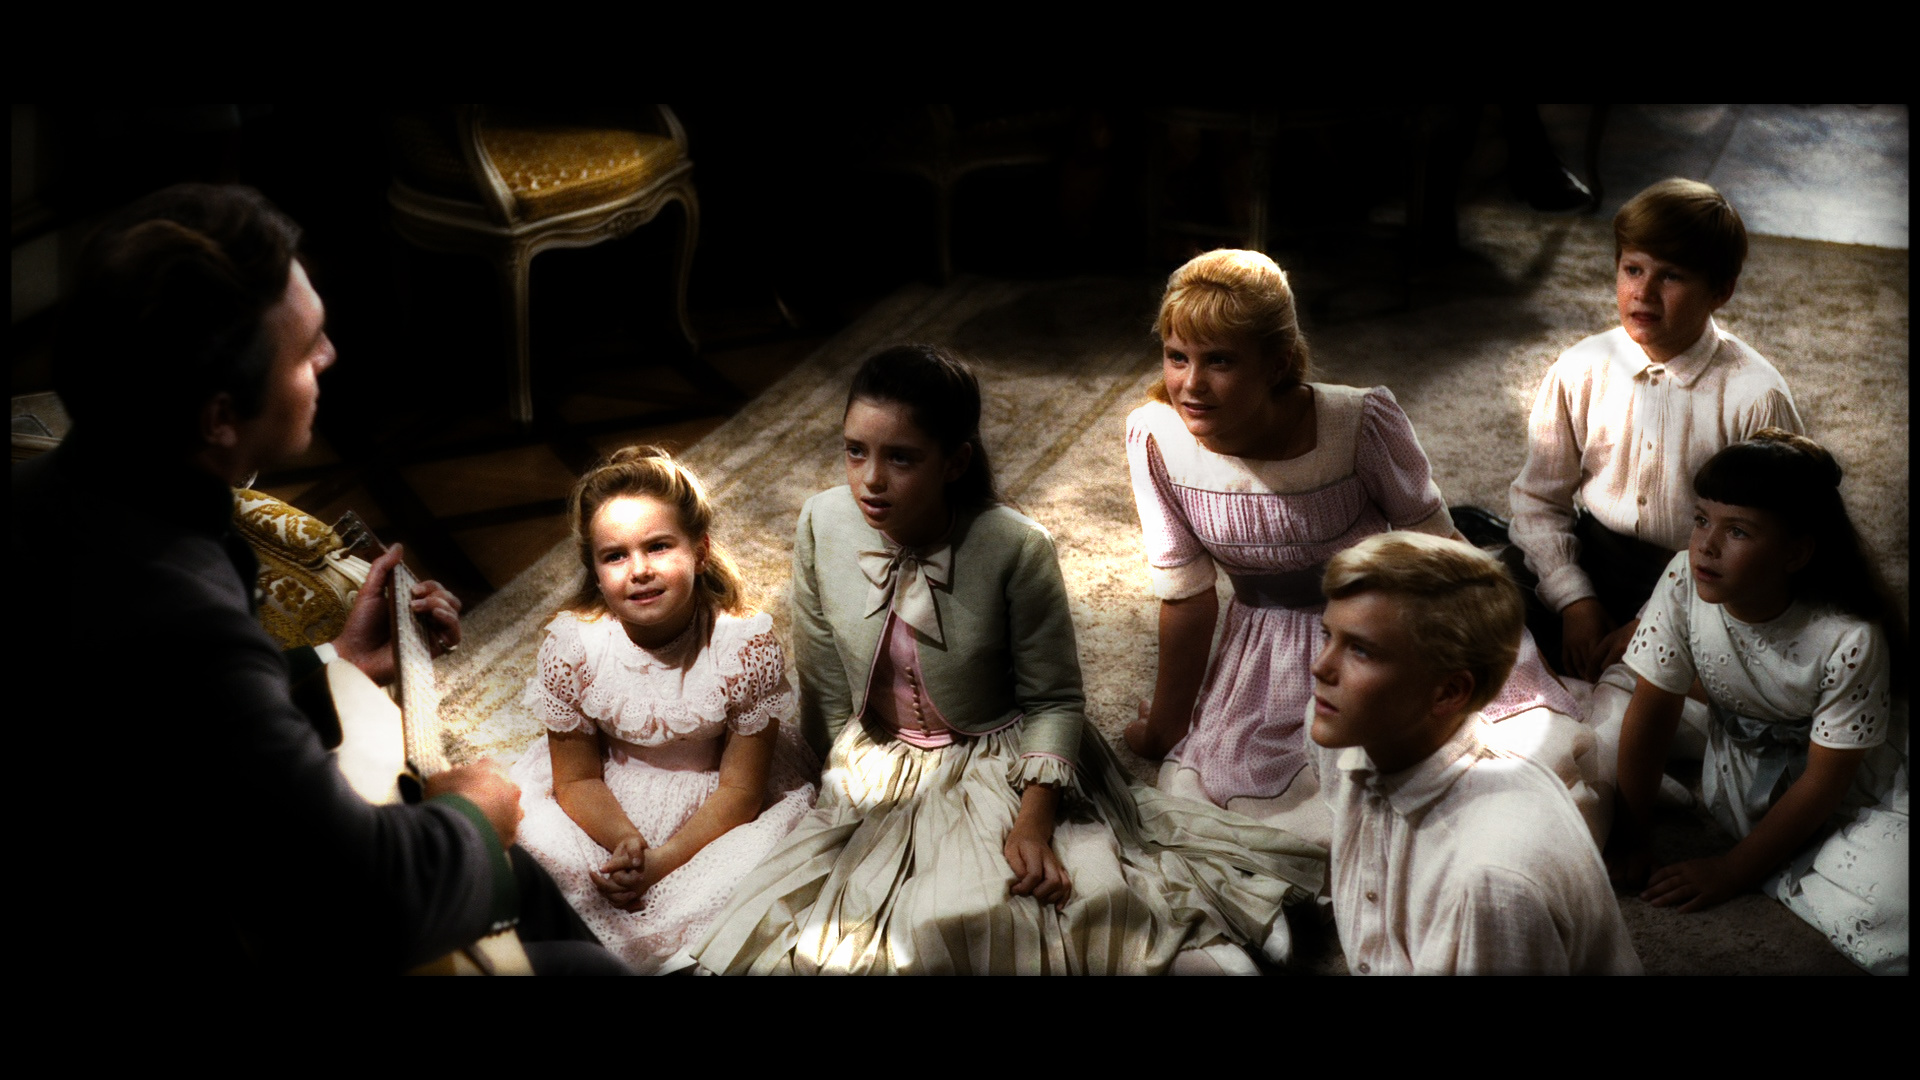 The Sound Of Music 1920x1080